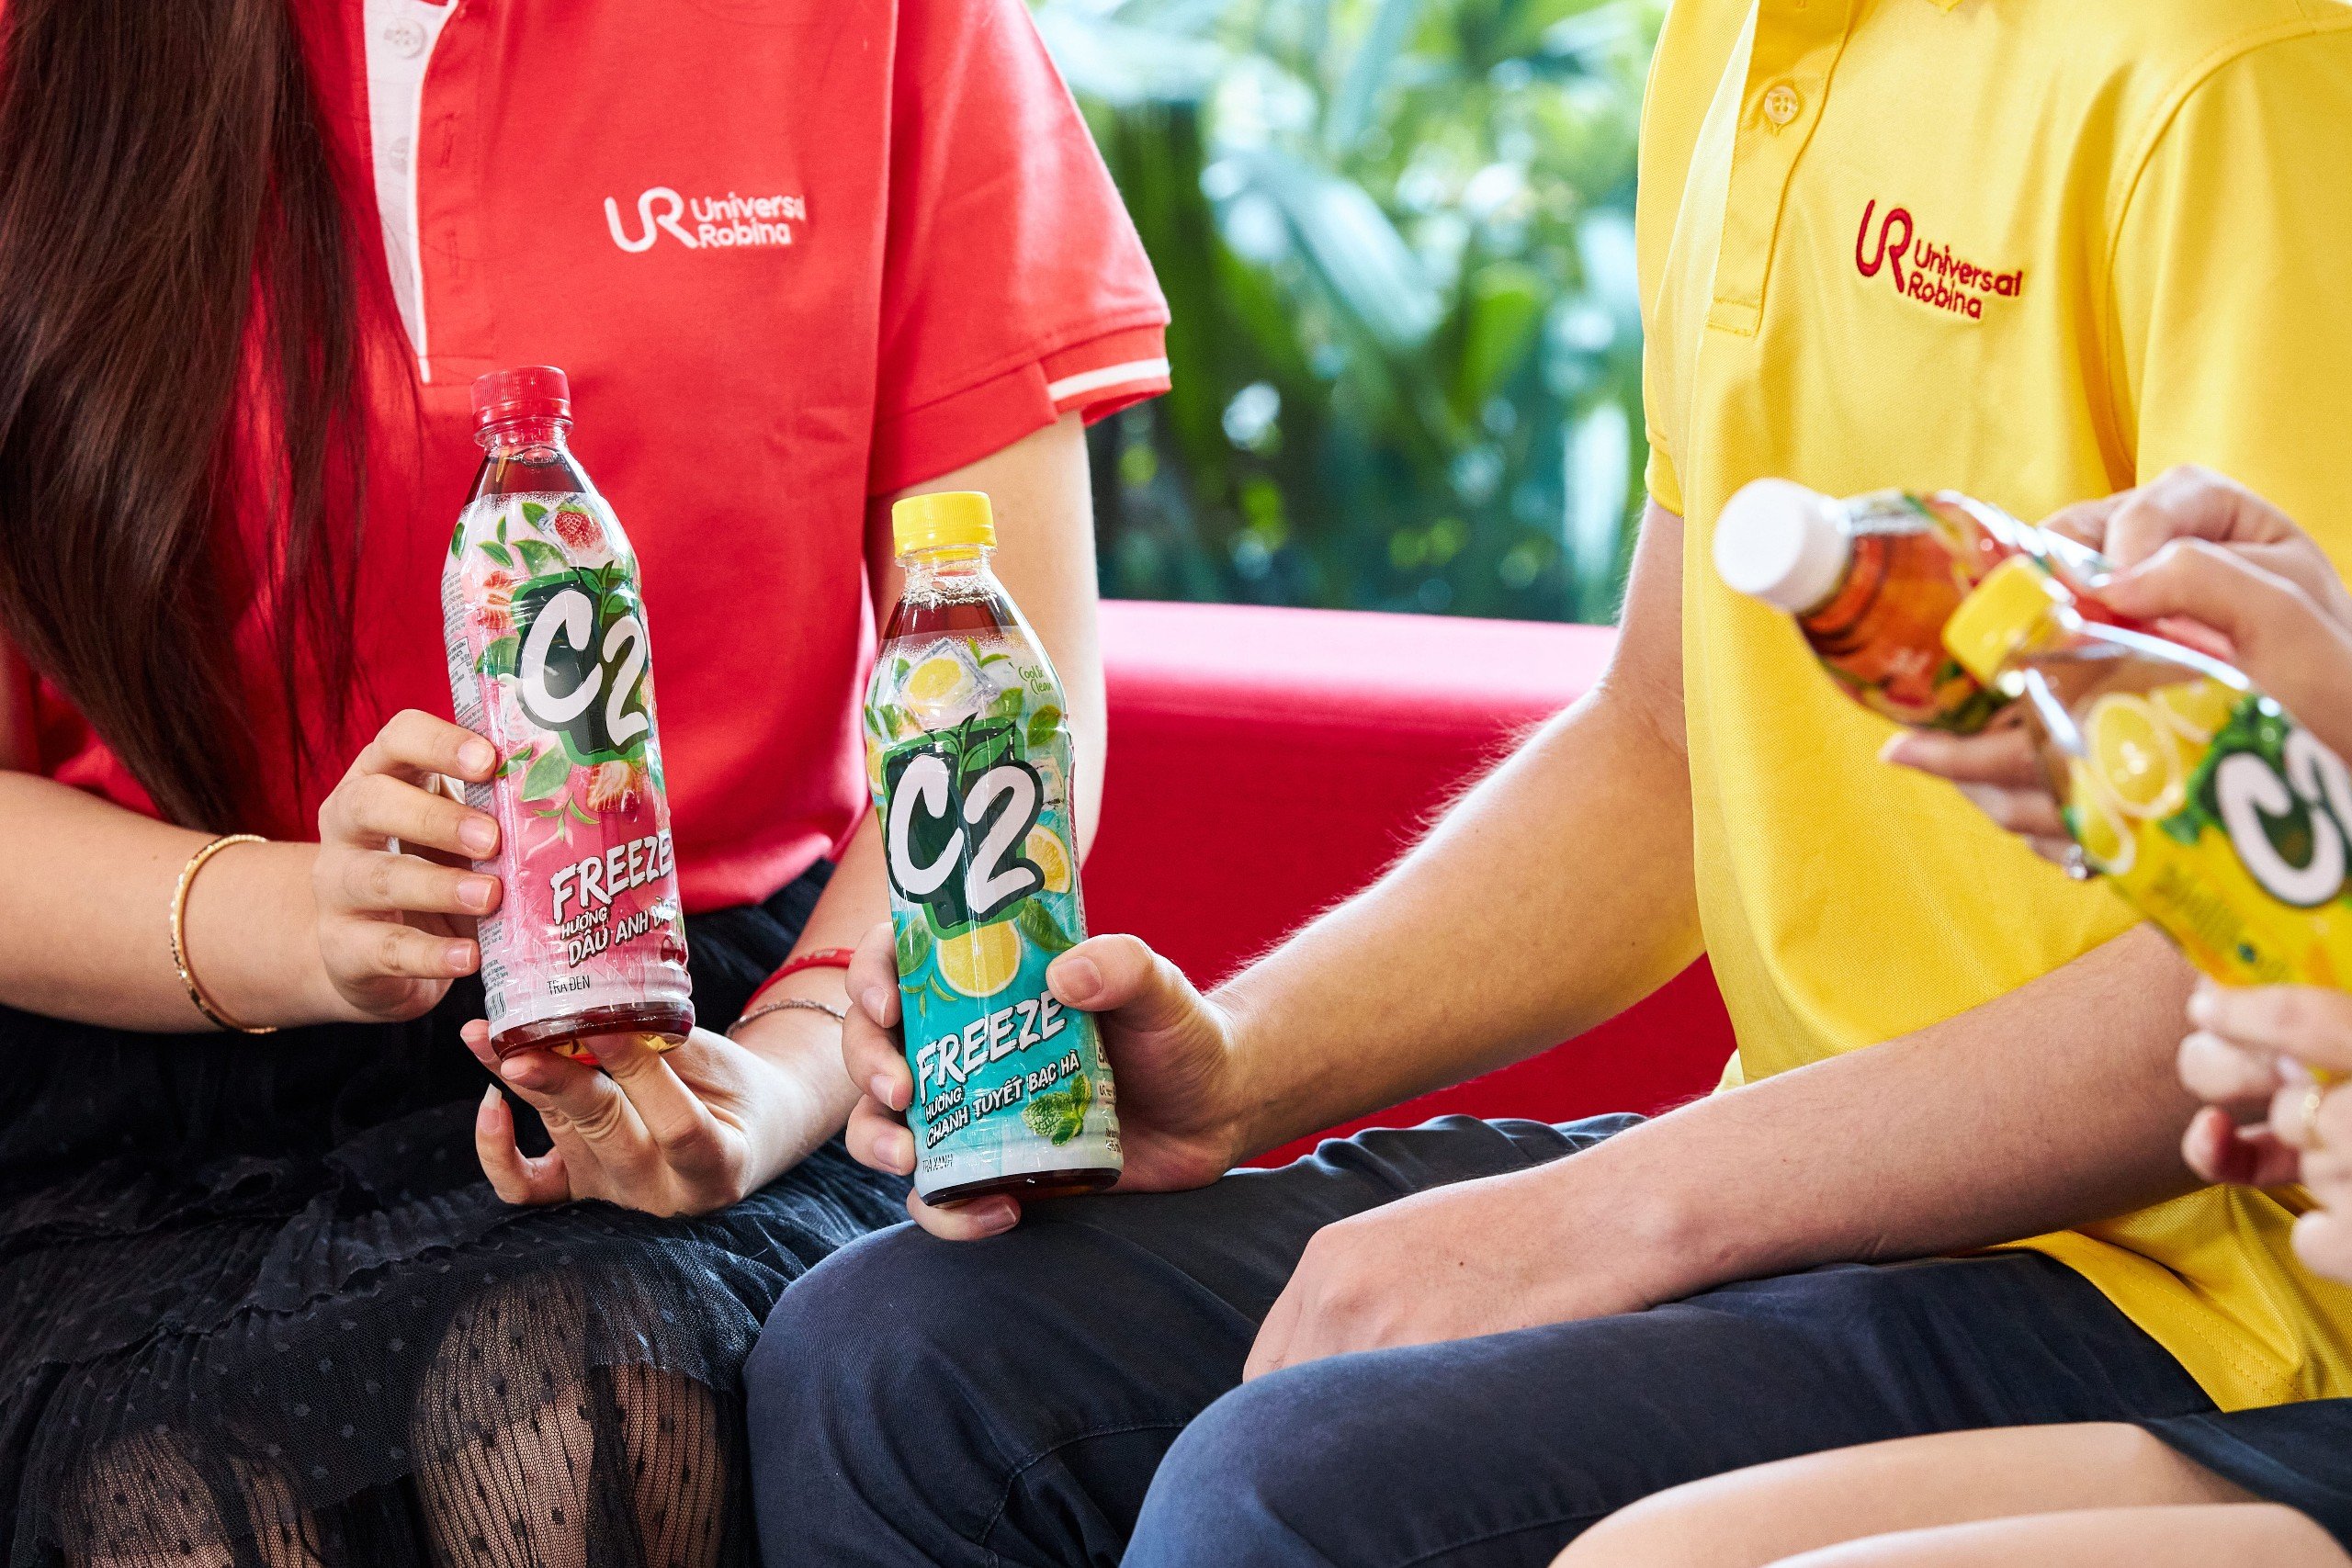 URC VIETNAM: CONSISTENT WITH SUSTAINABLE VALUES AND THE POSITION OF A PRESTIGIOUS BEVERAGE COMPANY